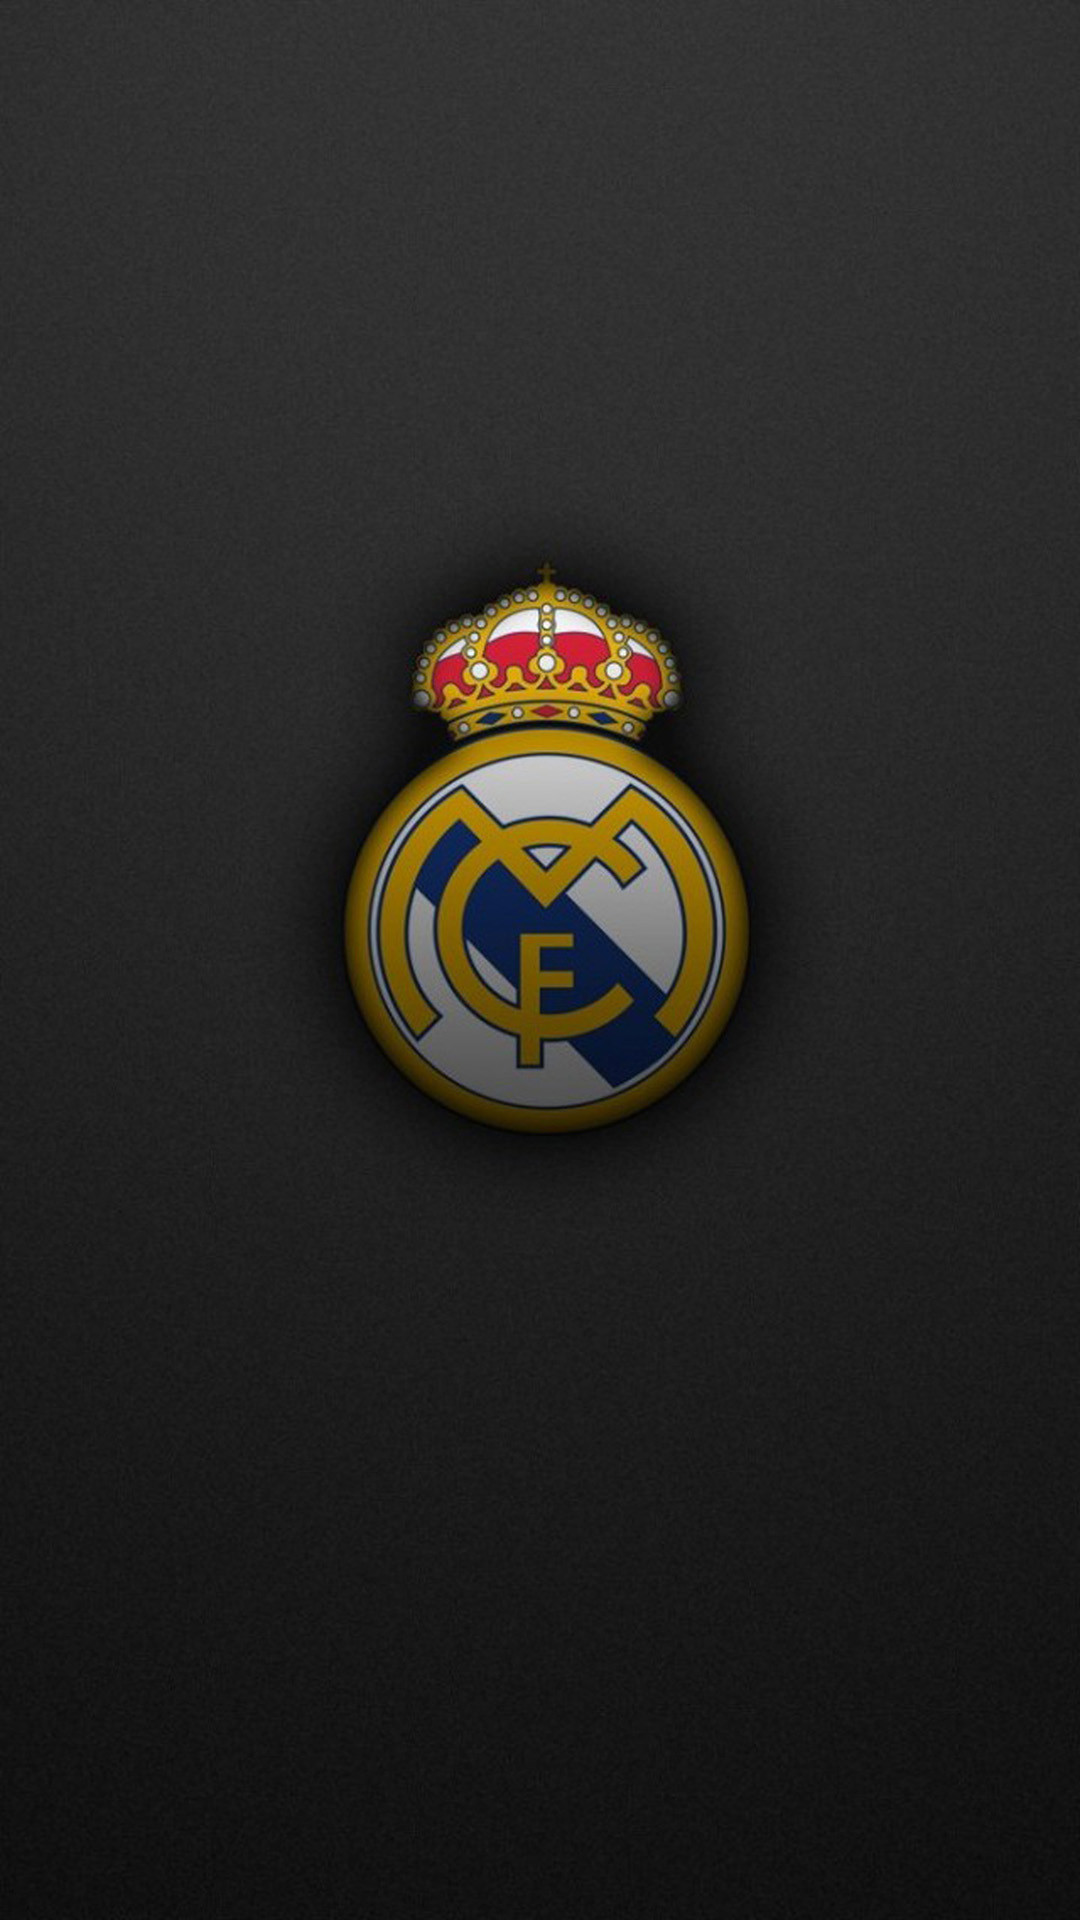 Real Madrid Wallpapers For Iphone 7, Iphone 7 Plus, - Iphone Real Madrid  Wallpaper 4k - 1080x1920 Wallpaper 